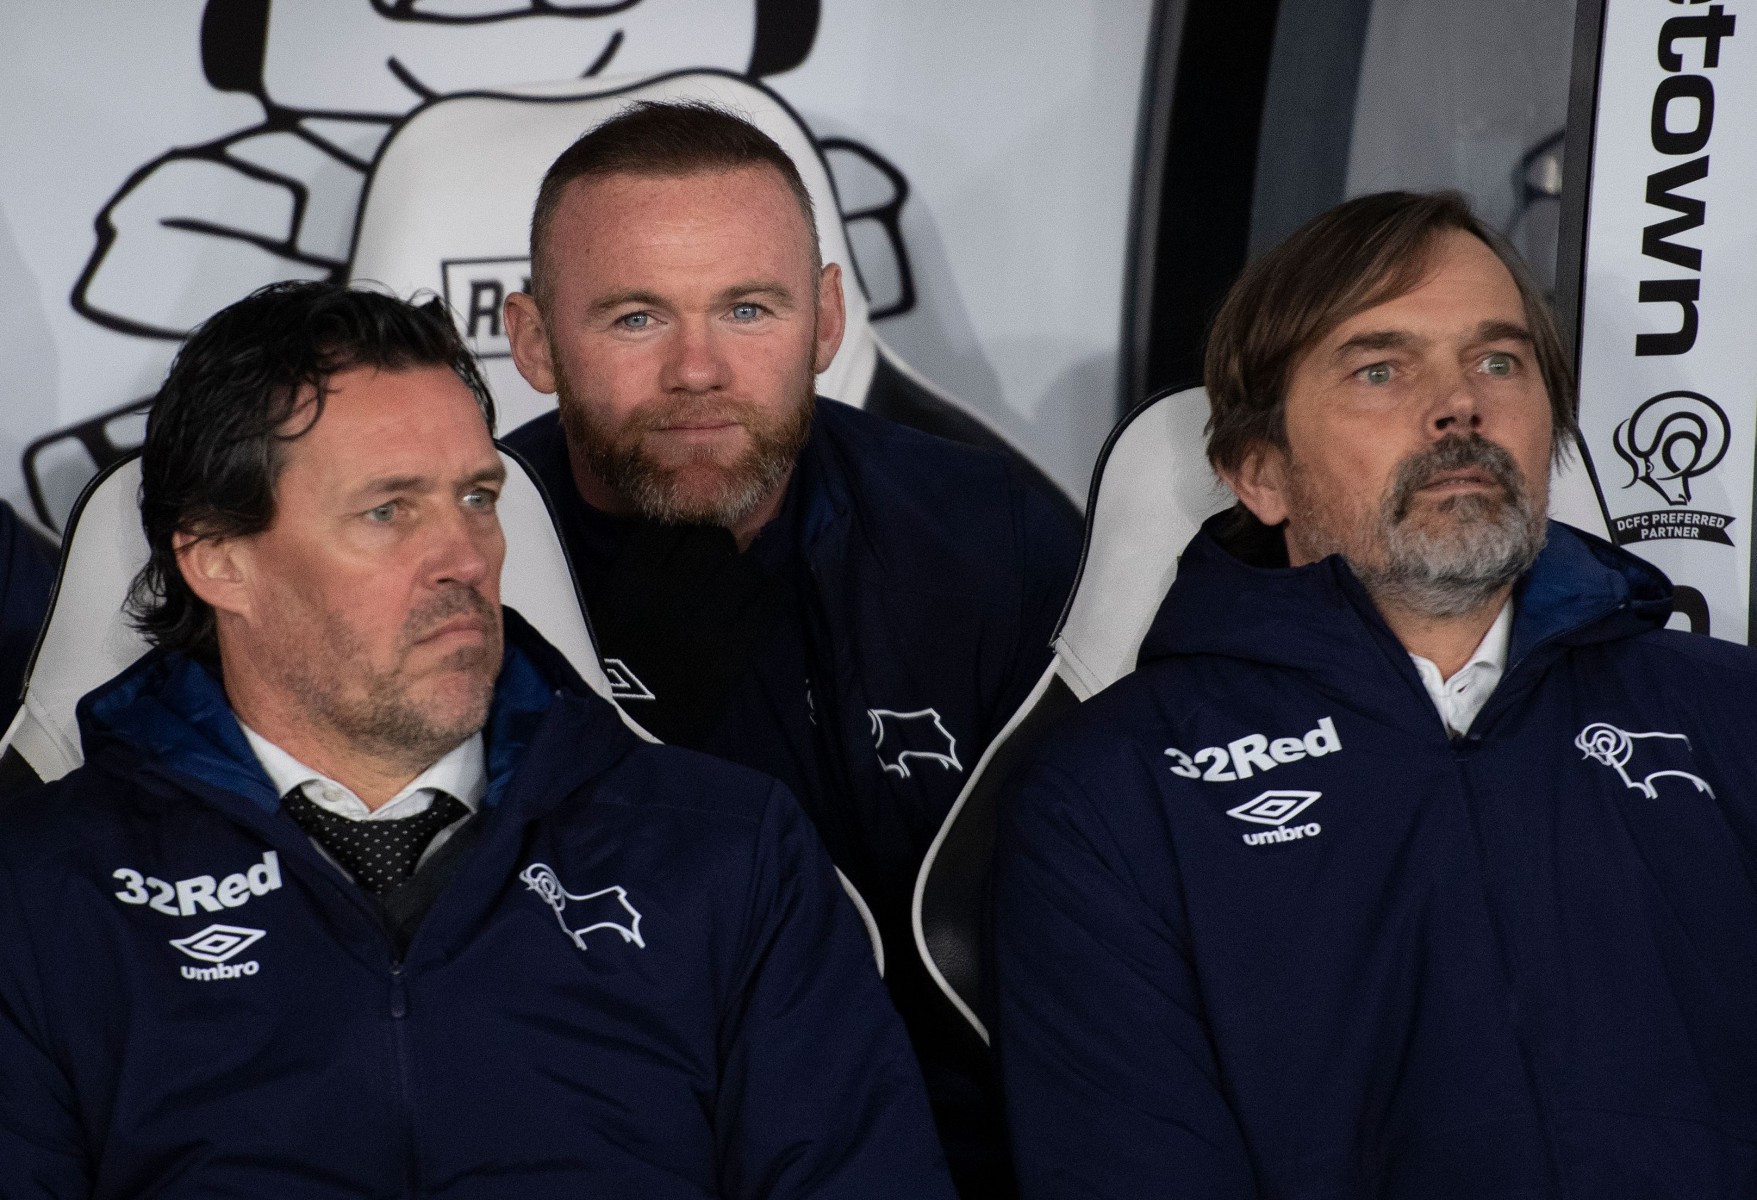 Rooney has been happy to listen and learn from Phillip Cocu as a coach at Derby